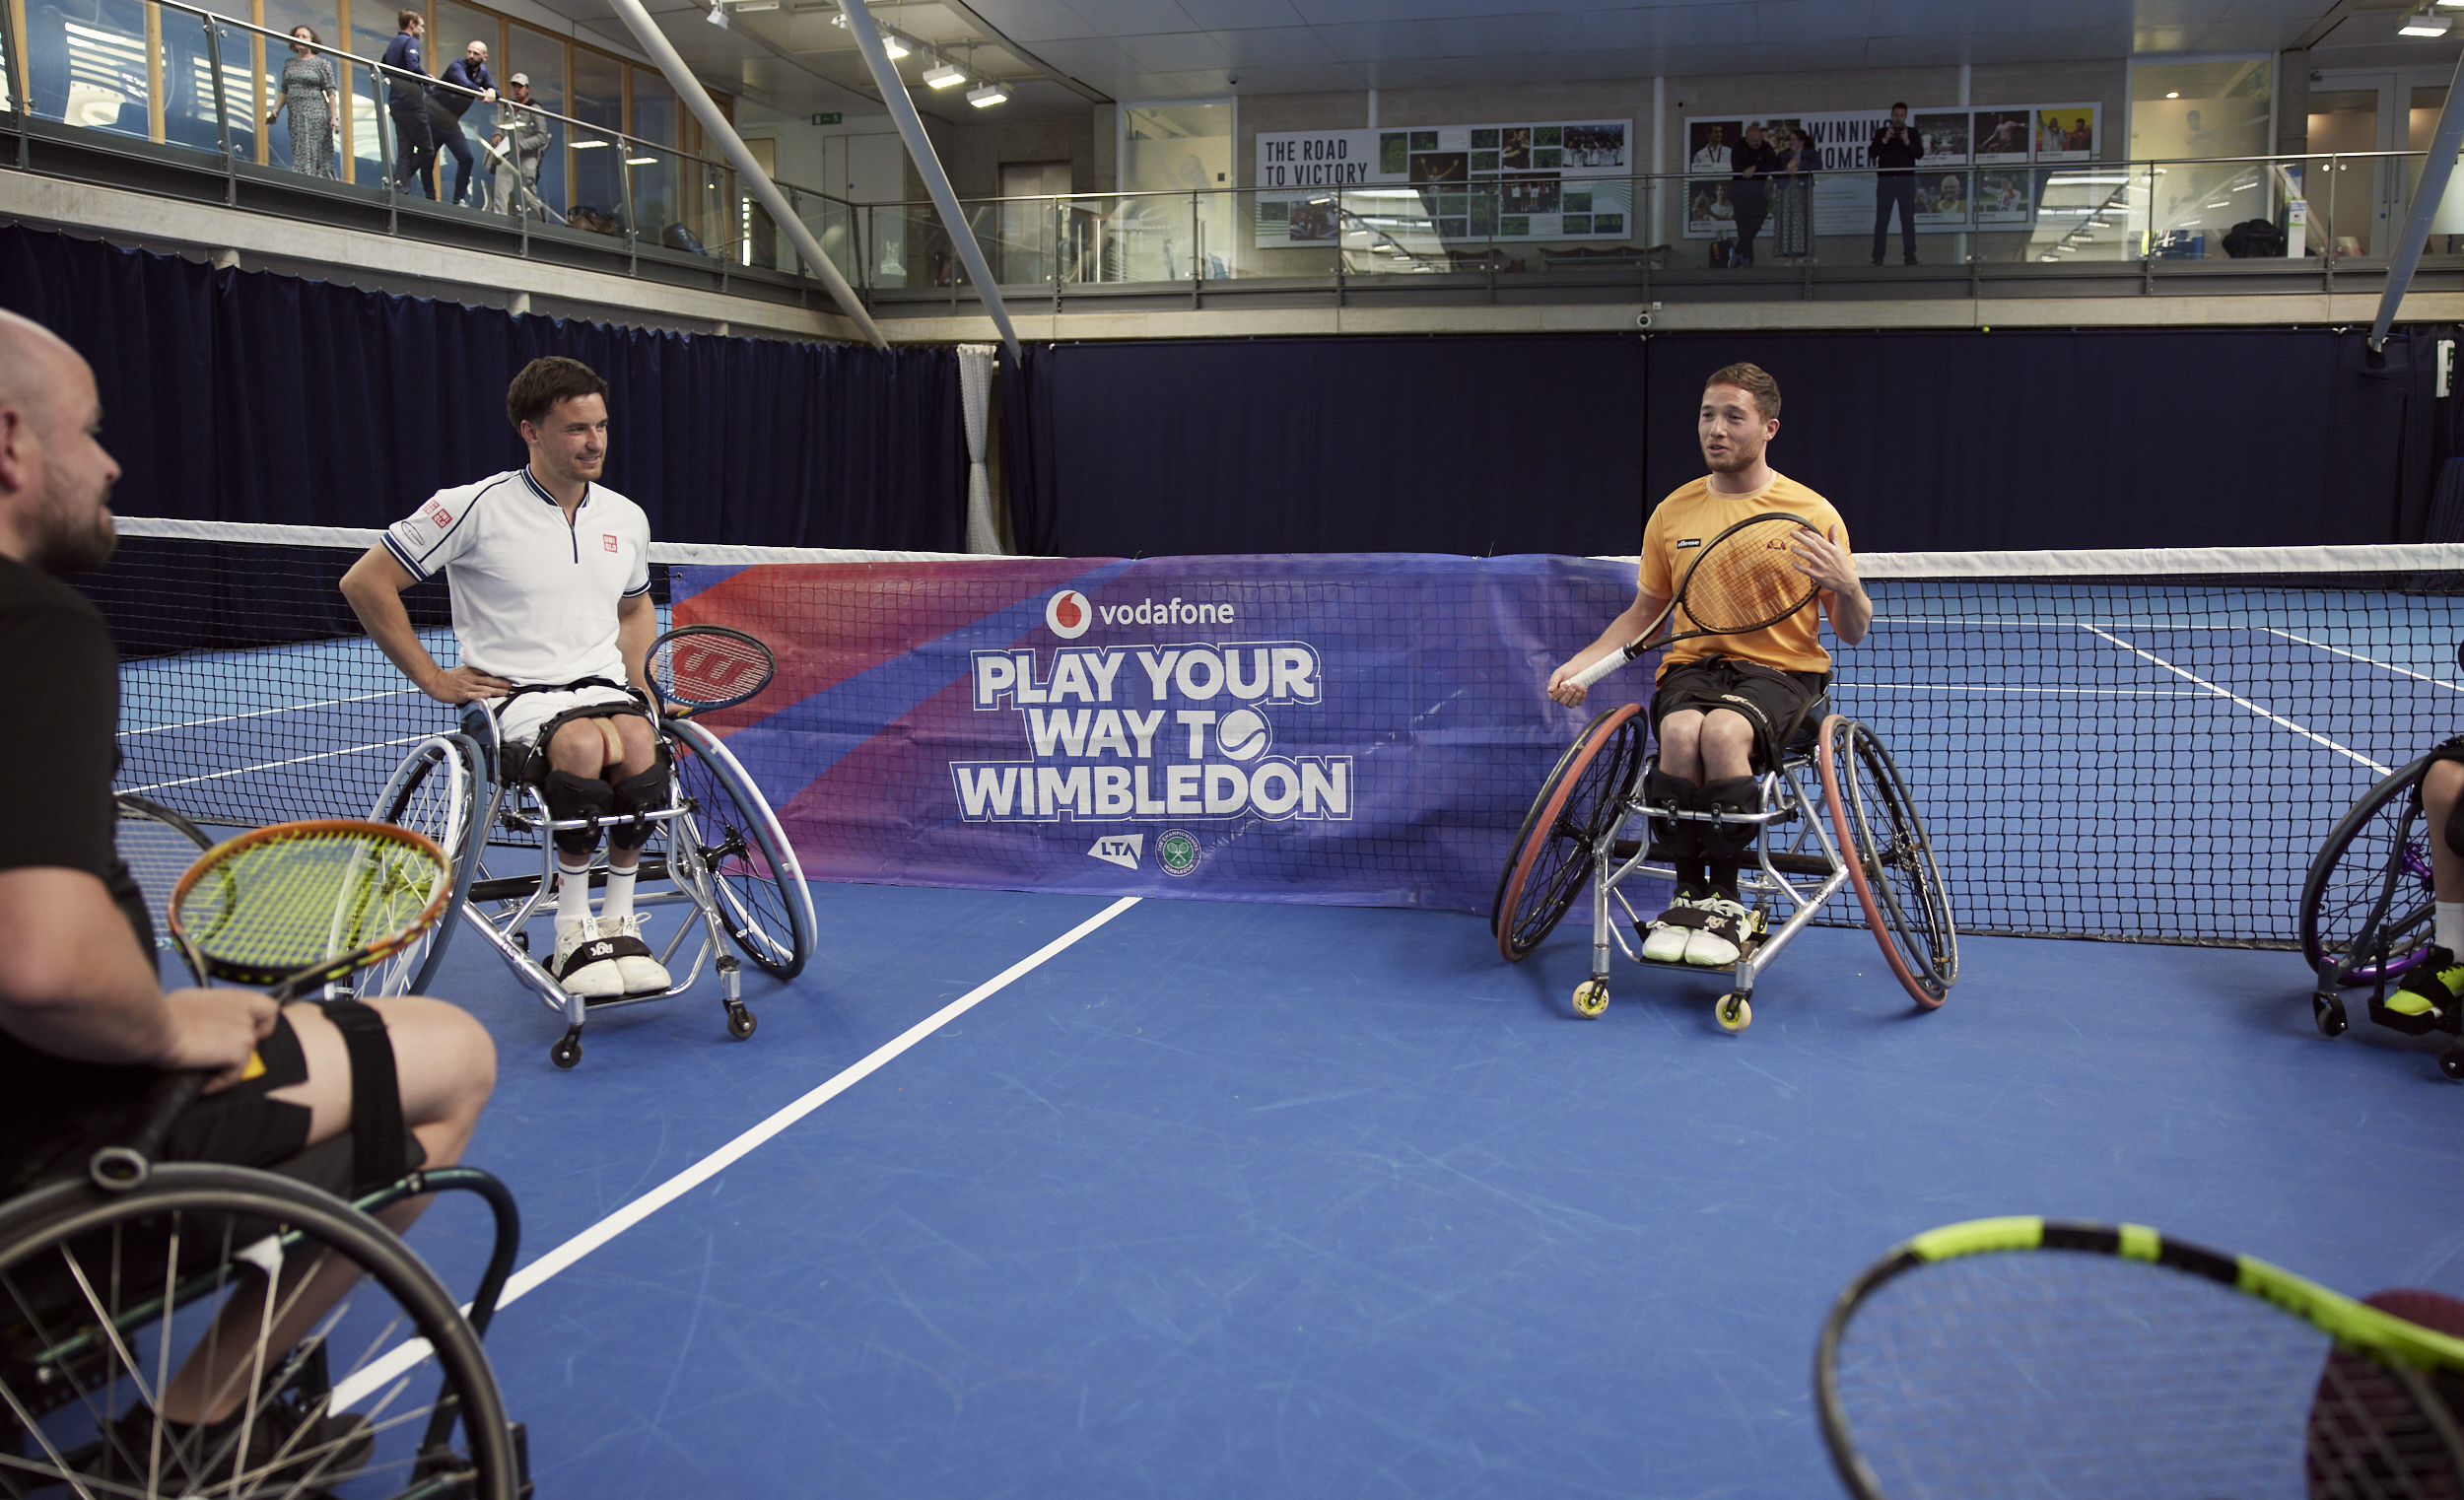 Hewett and Reid held a clinic for the participants in the Play Your Way to Wimbledon campaign